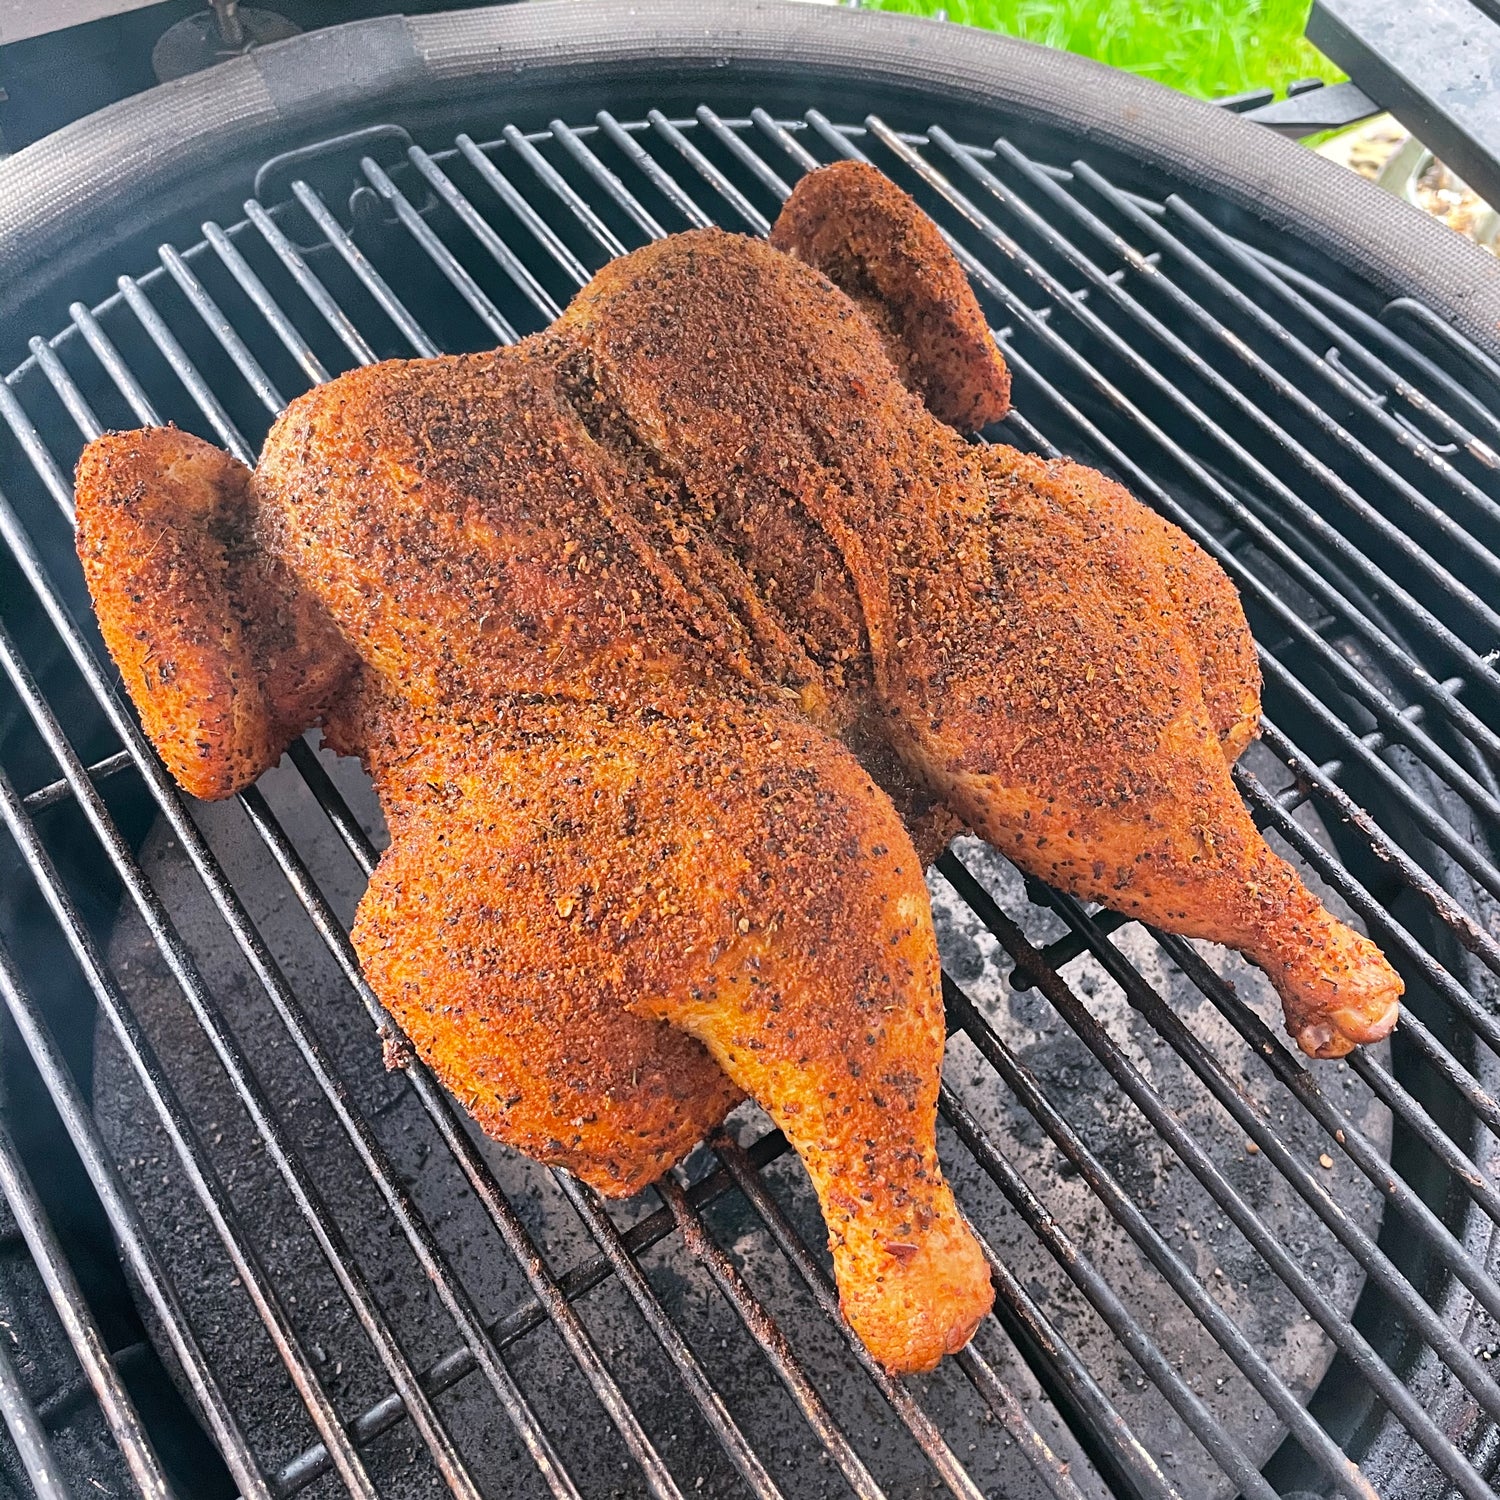 Spatchcock Chicken on the grill